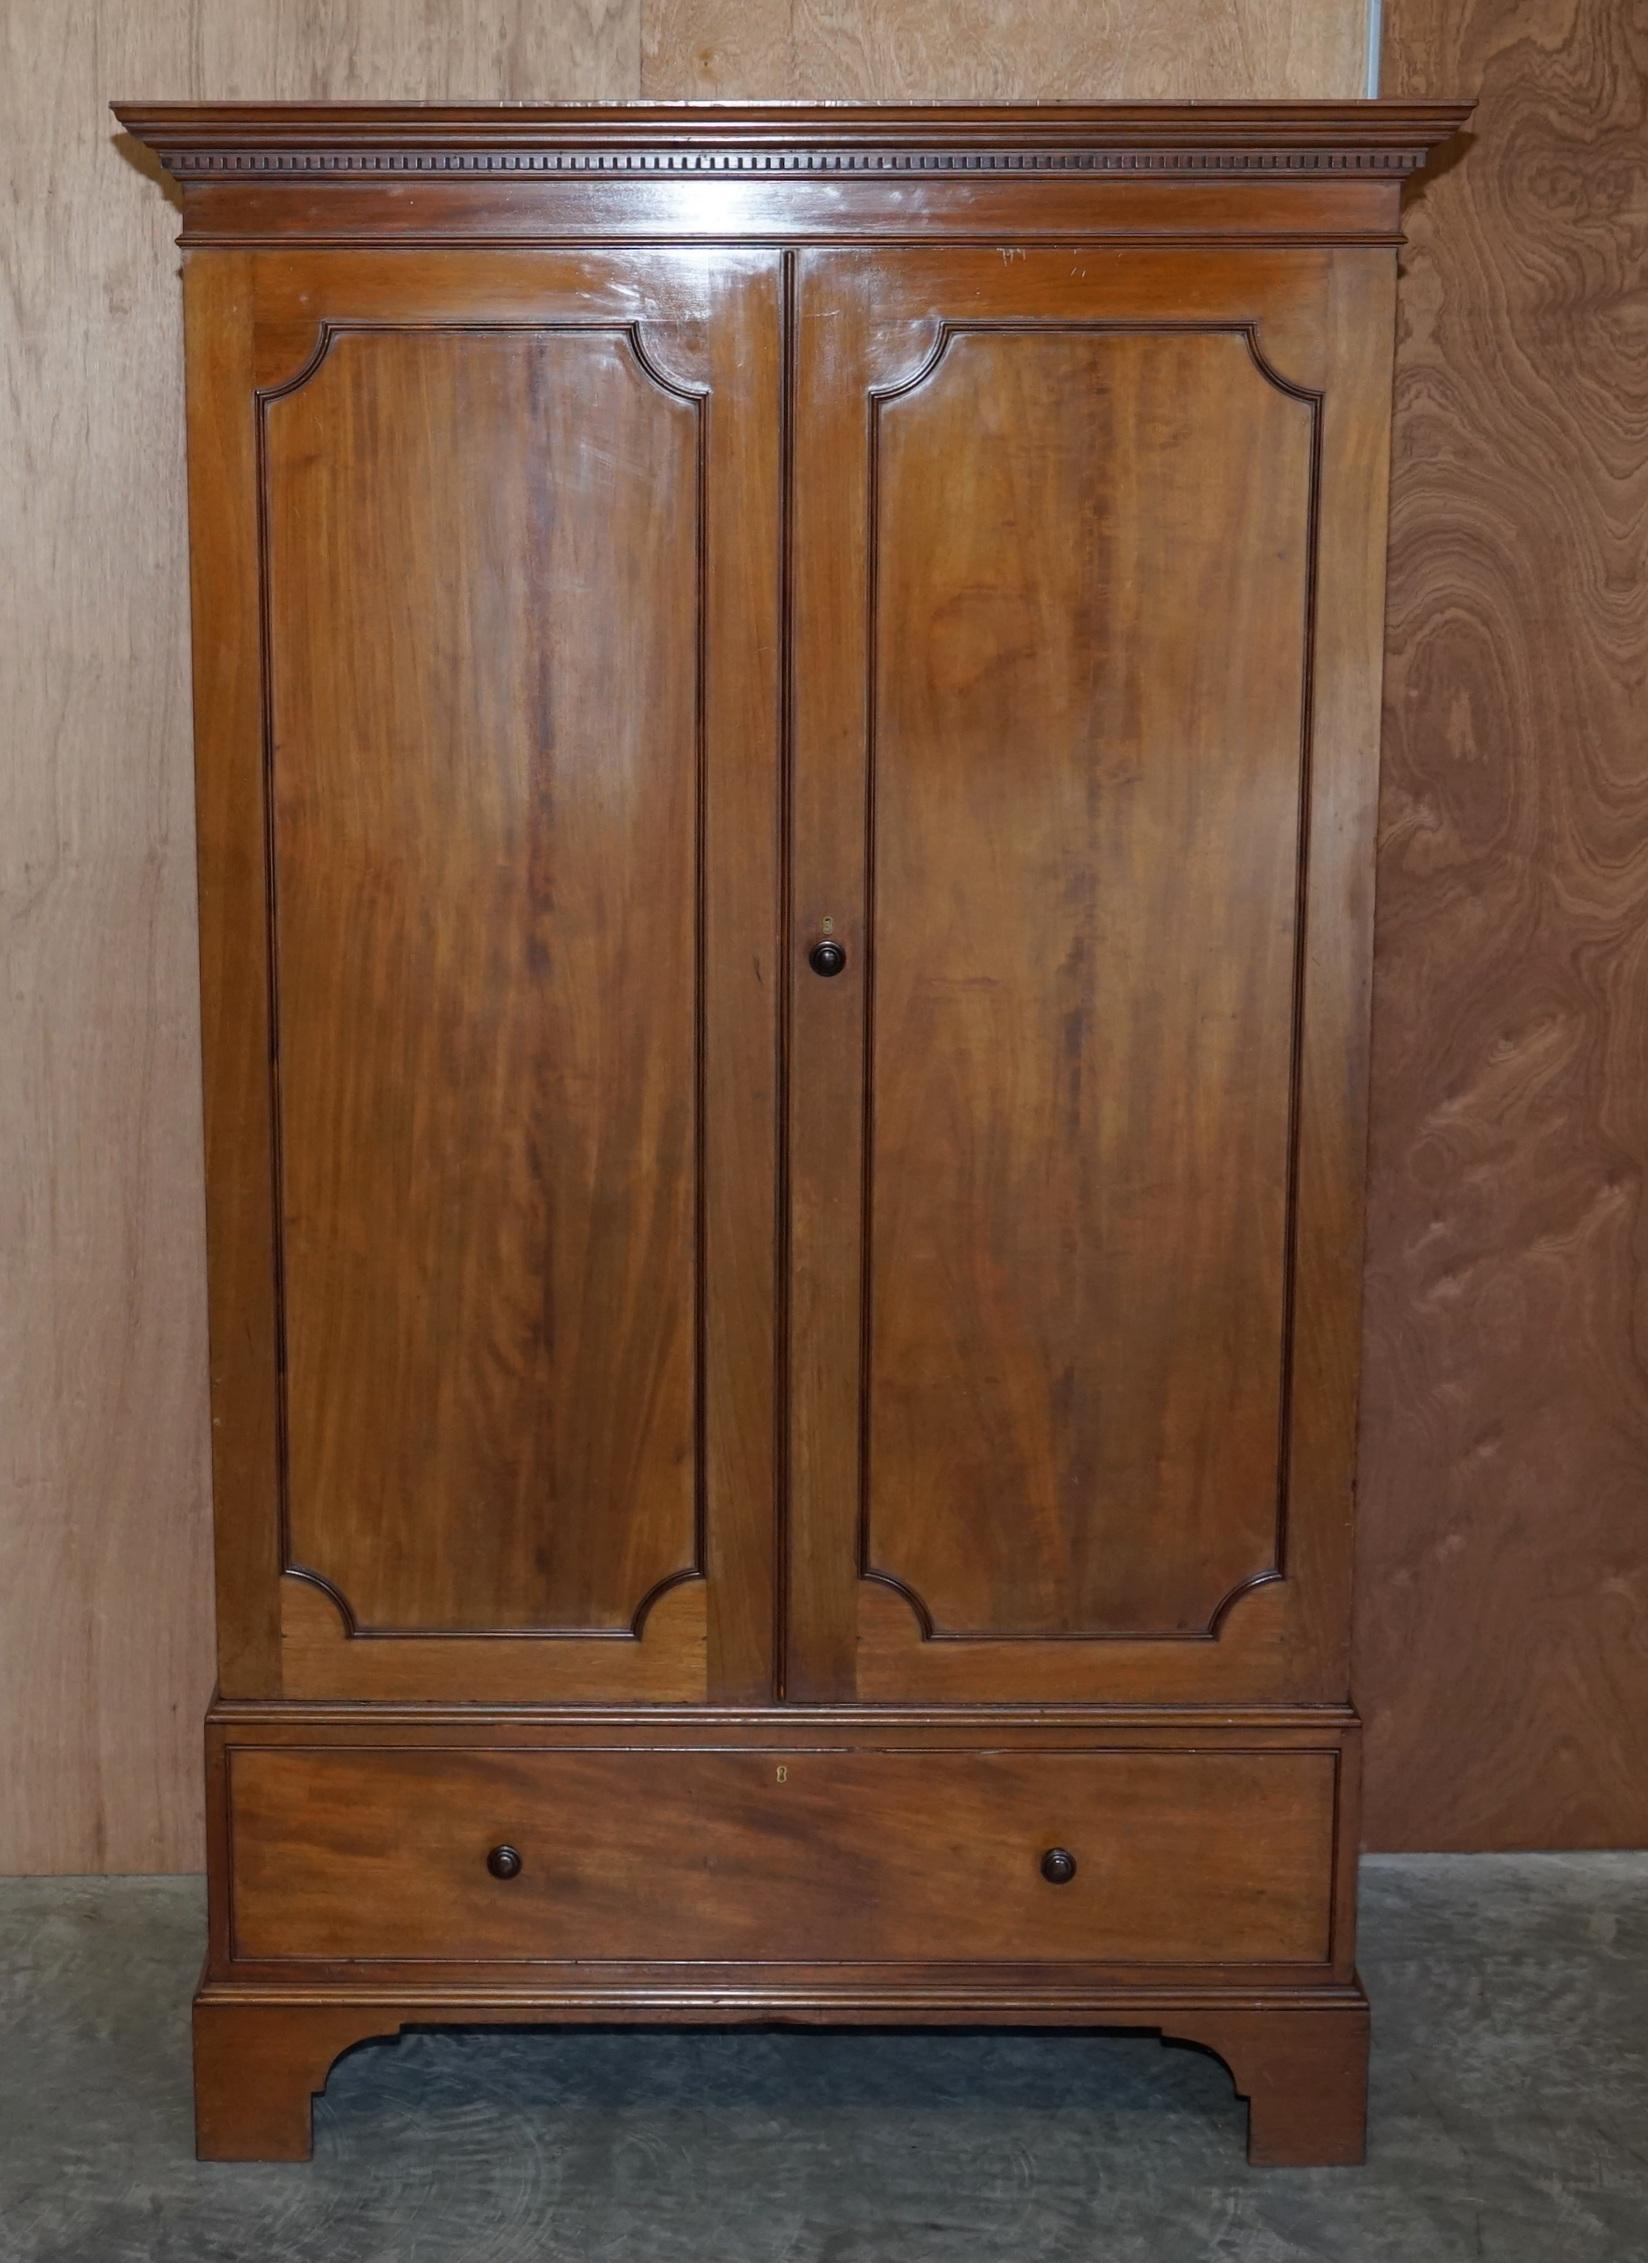 We are delighted to offer for sale this very rare original Howard & Son’s Berners Street fully stamped light mahogany wardrobe

This has to be one of my absolute favourite antiques, made by the great firm of Howard, it’s a Victorian piece with all